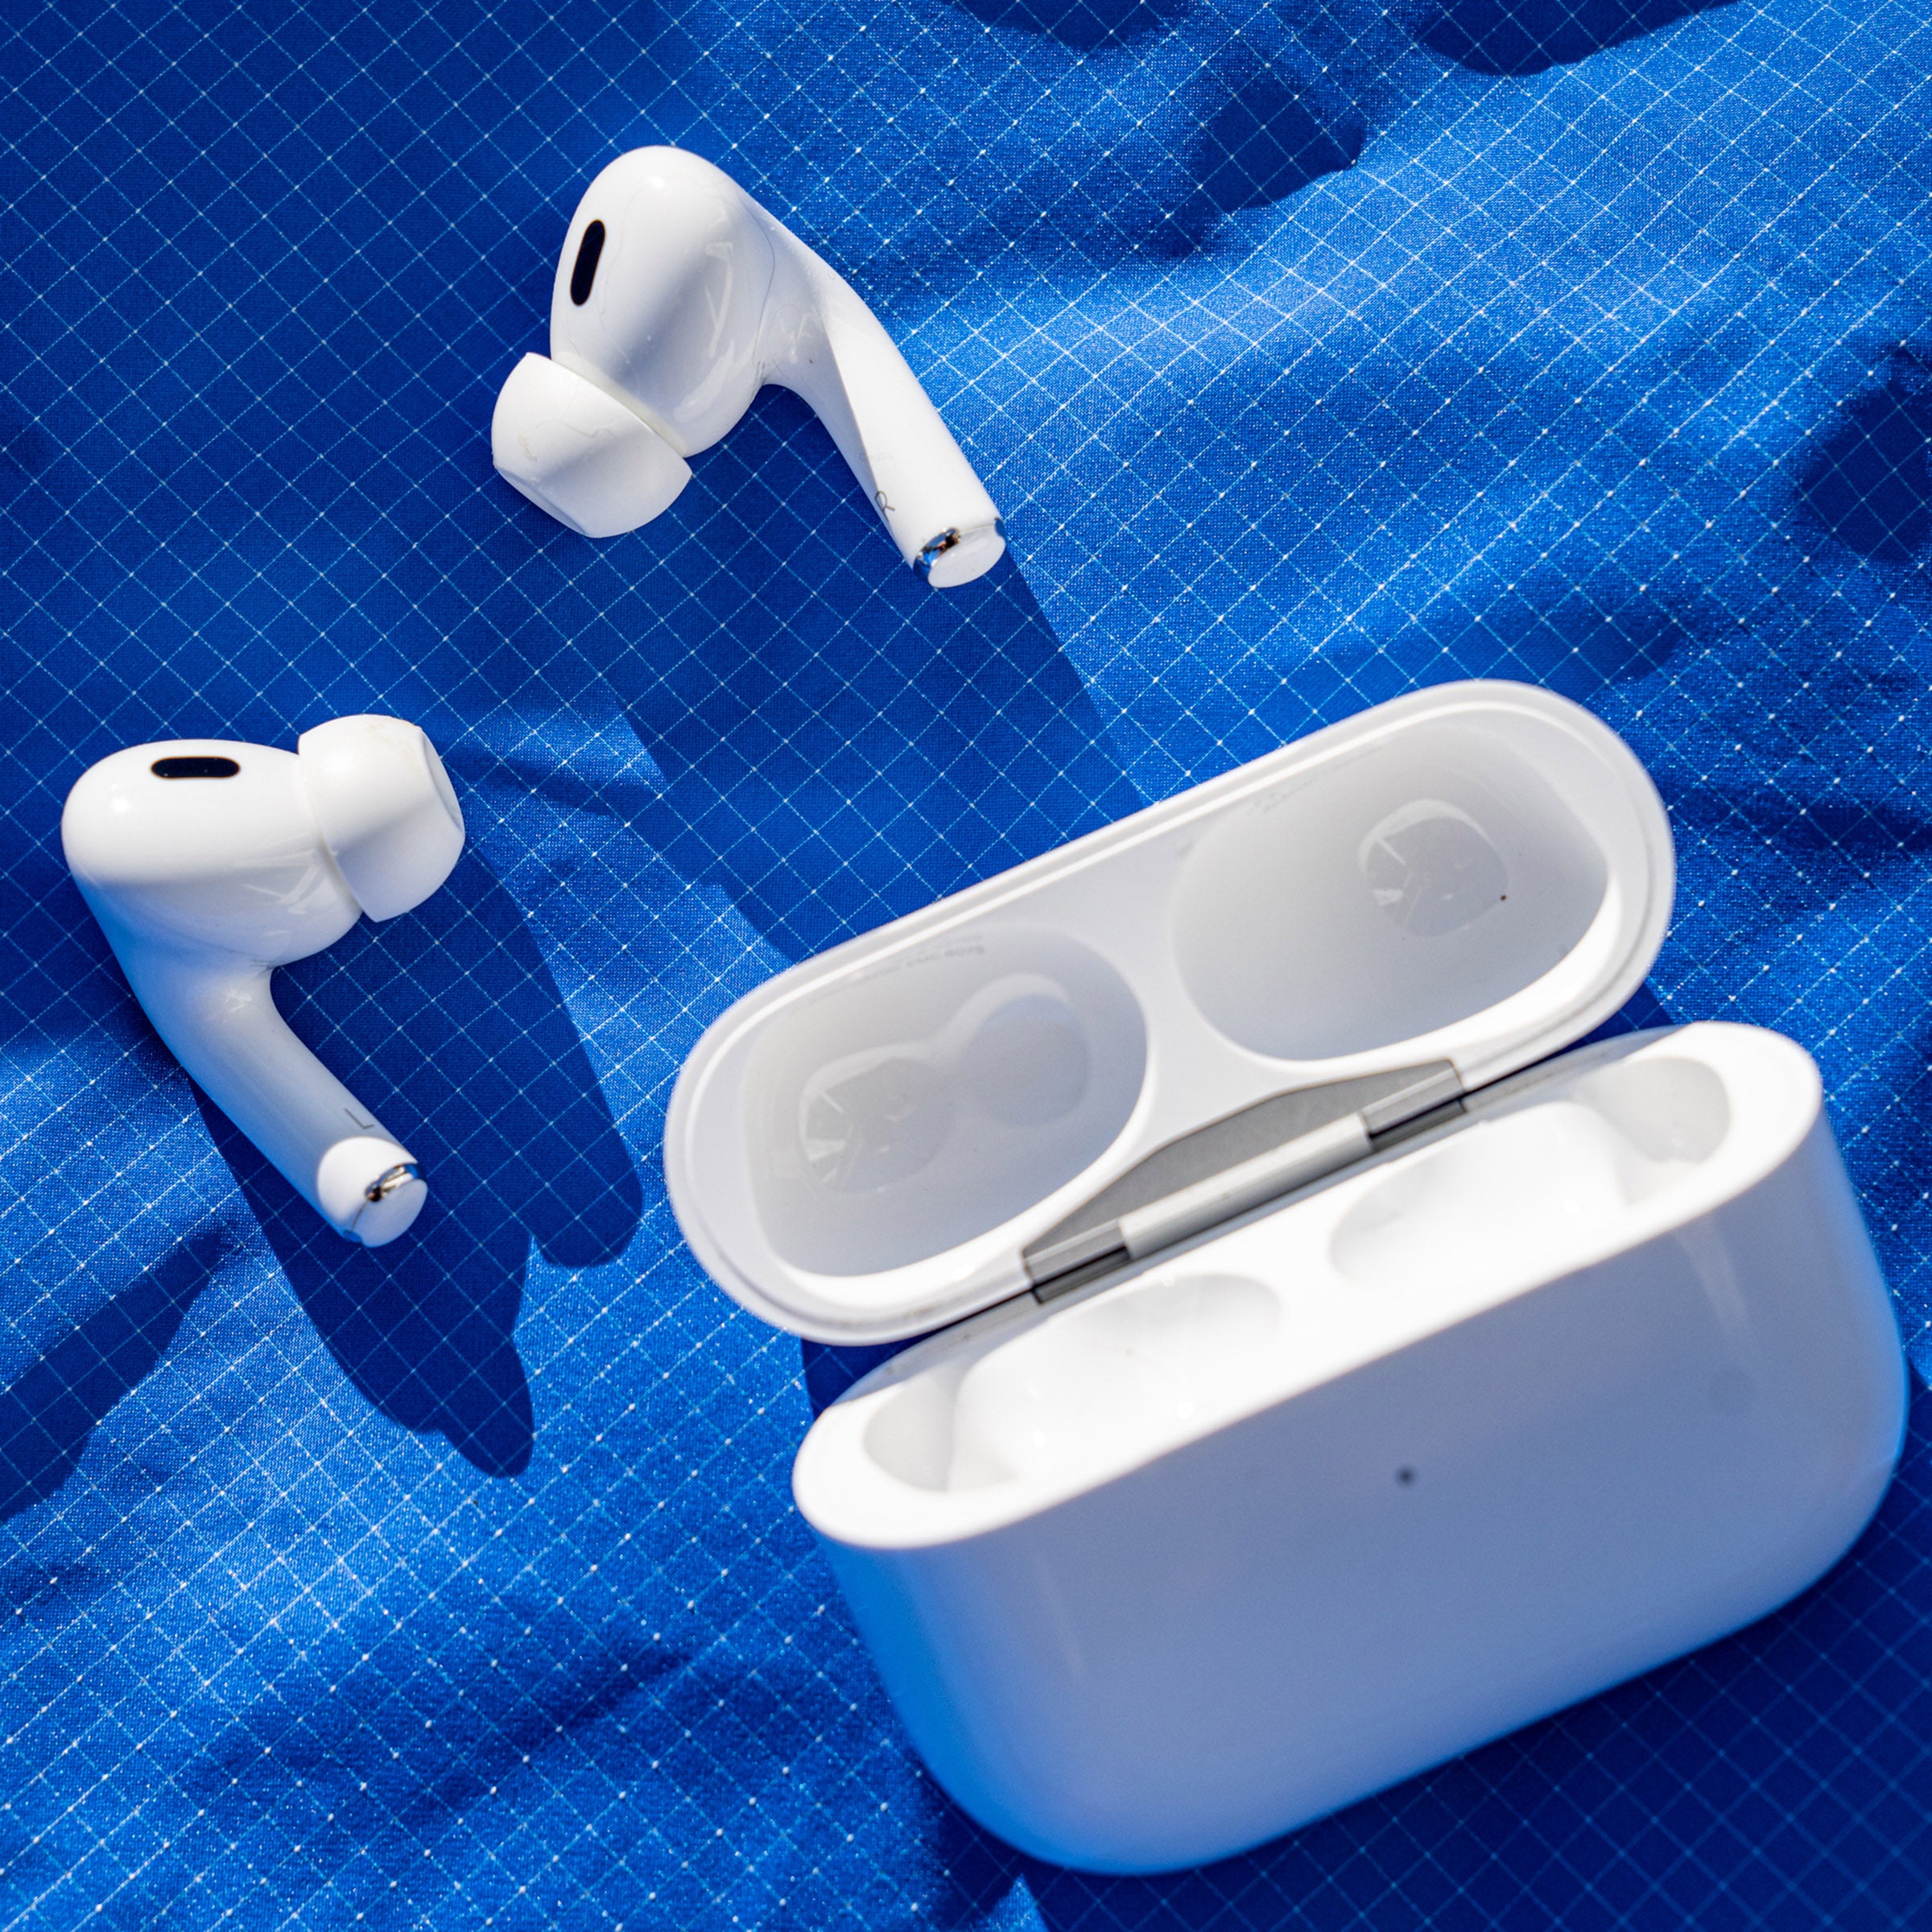 Apple AirPods Pro 2 Review: The Only Headphones You Need - Outside ...